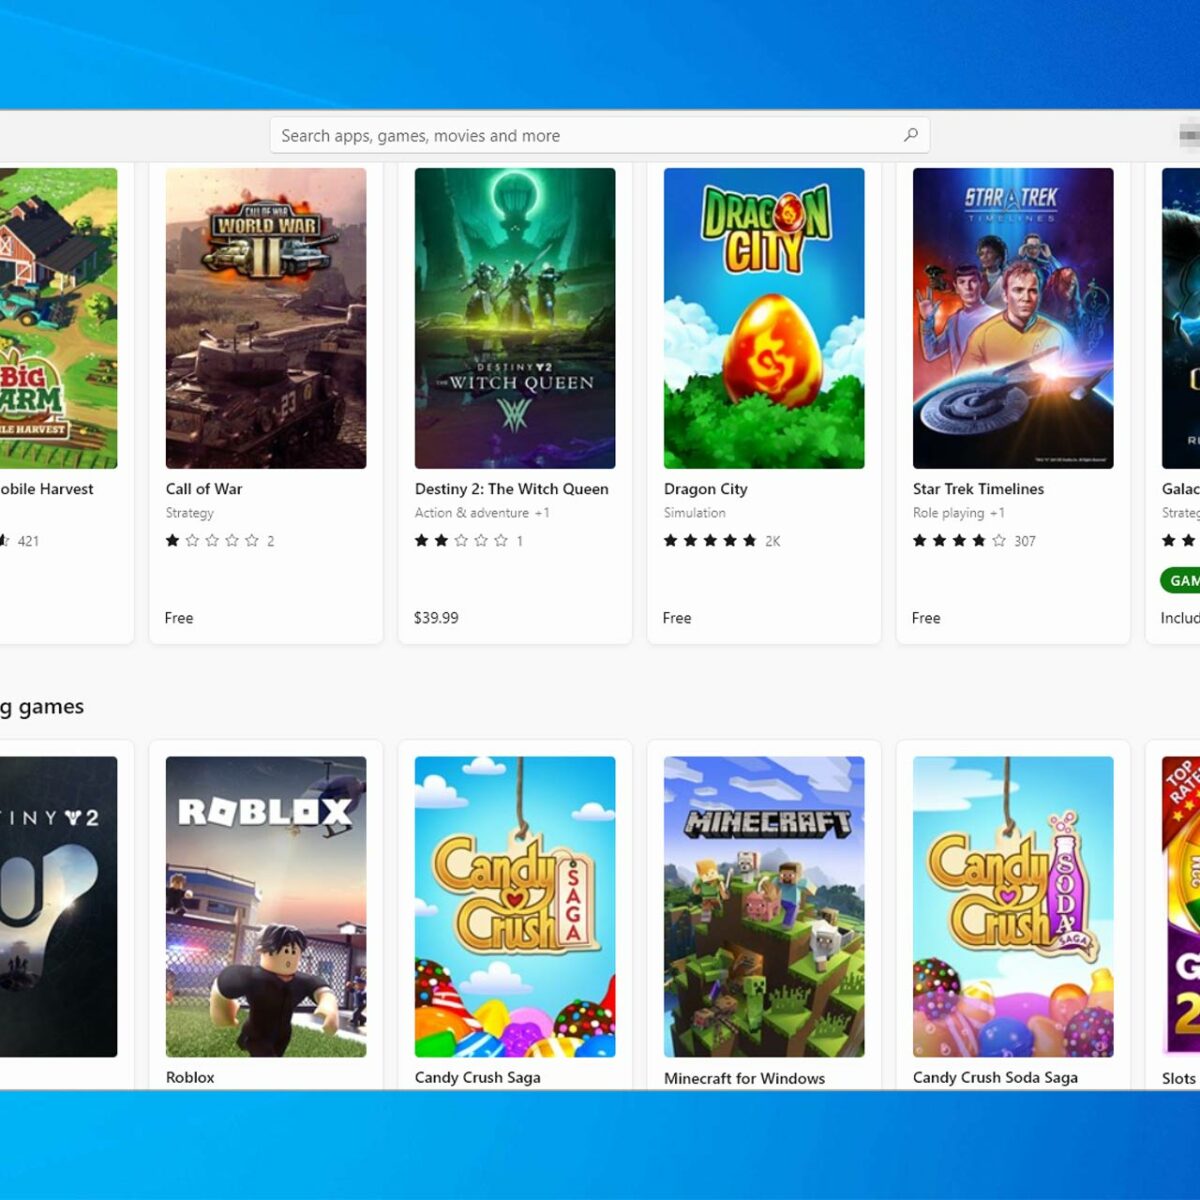 how to get roblox on microsoft store when it is owned but not